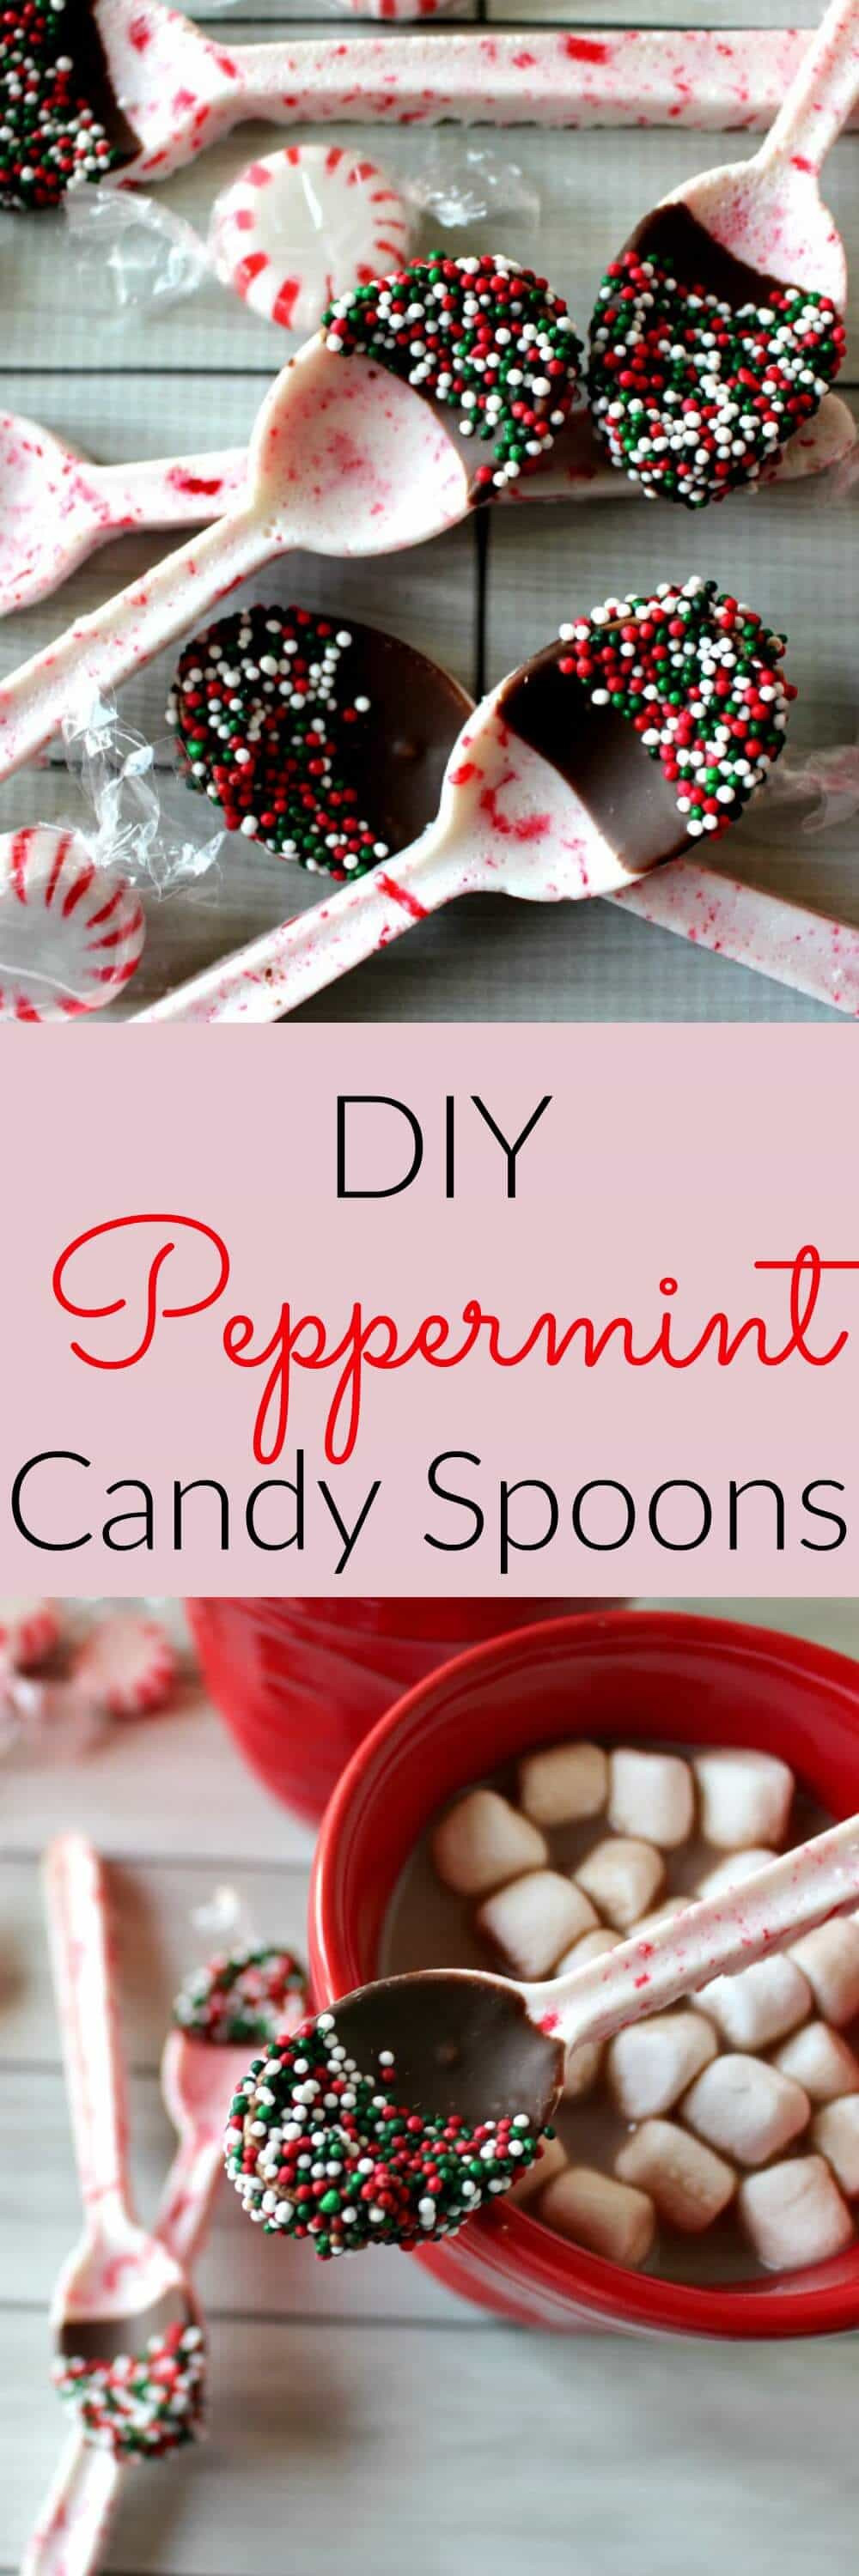 DIY Christmas Gifts
 DIY Peppermint Candy Spoons Princess Pinky Girl